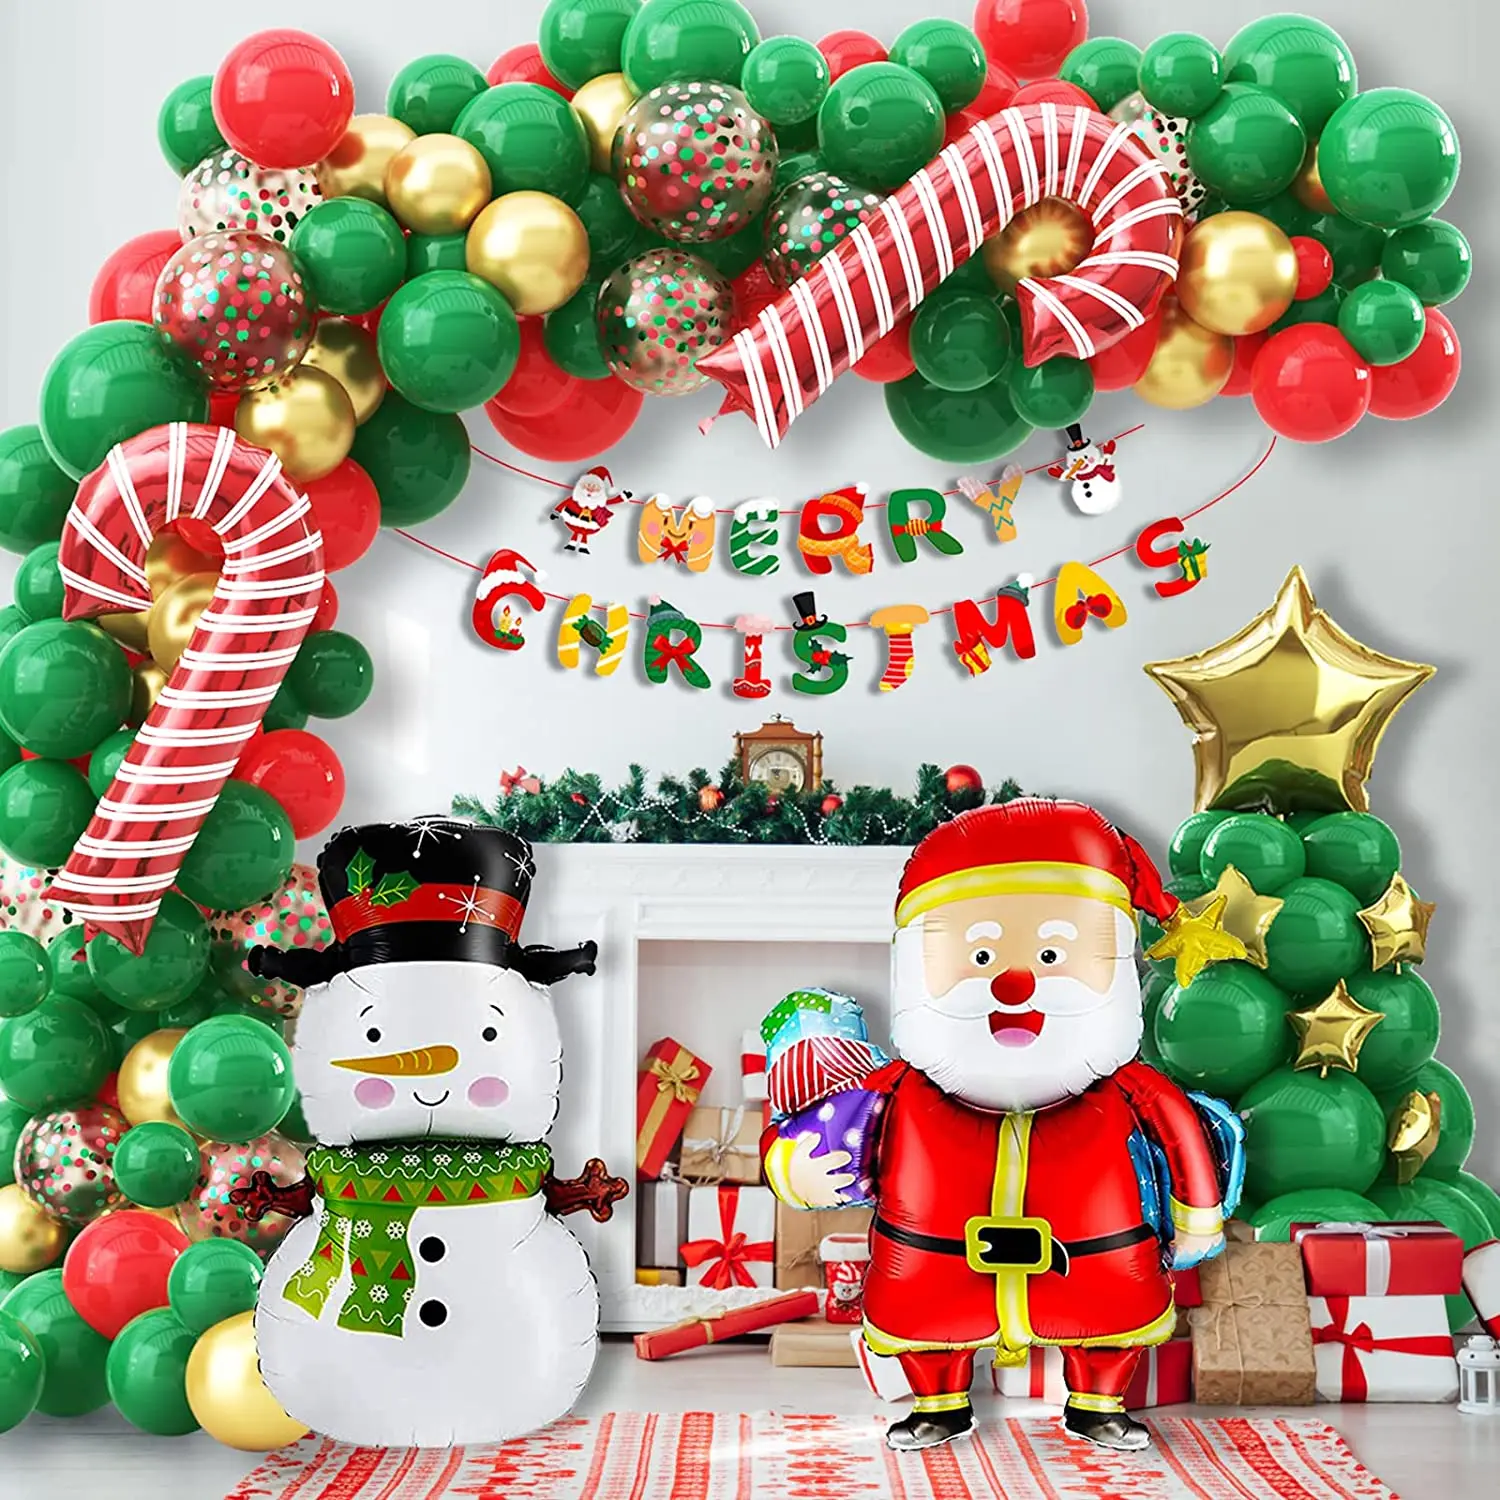 212 Pcs Balloon Garland Arch Kit Merry Christmas Banner Santa Claus Christmas Tree for Christmas Party Decorations Supplies